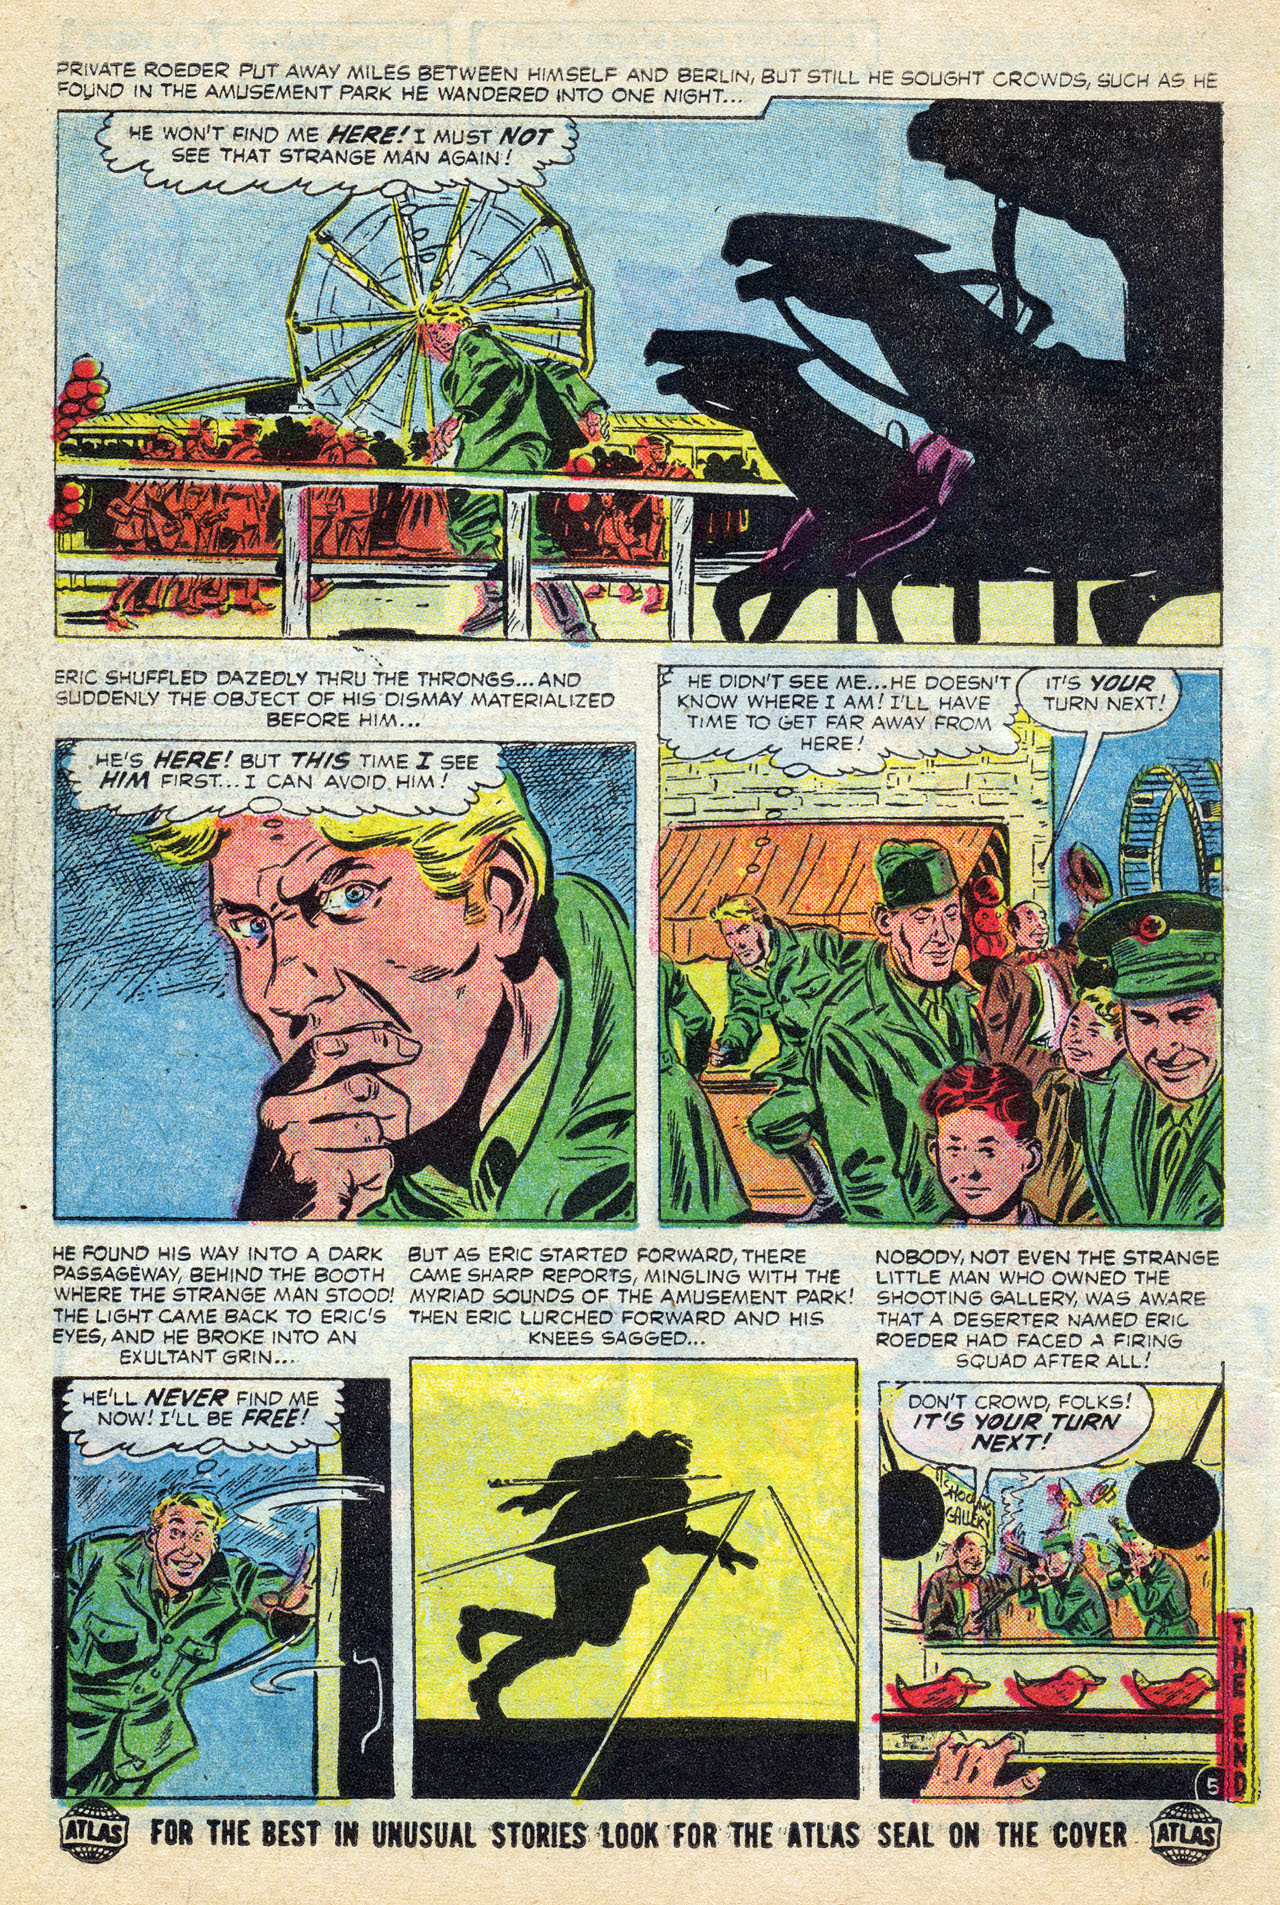 Marvel Tales (1949) 140 Page 13